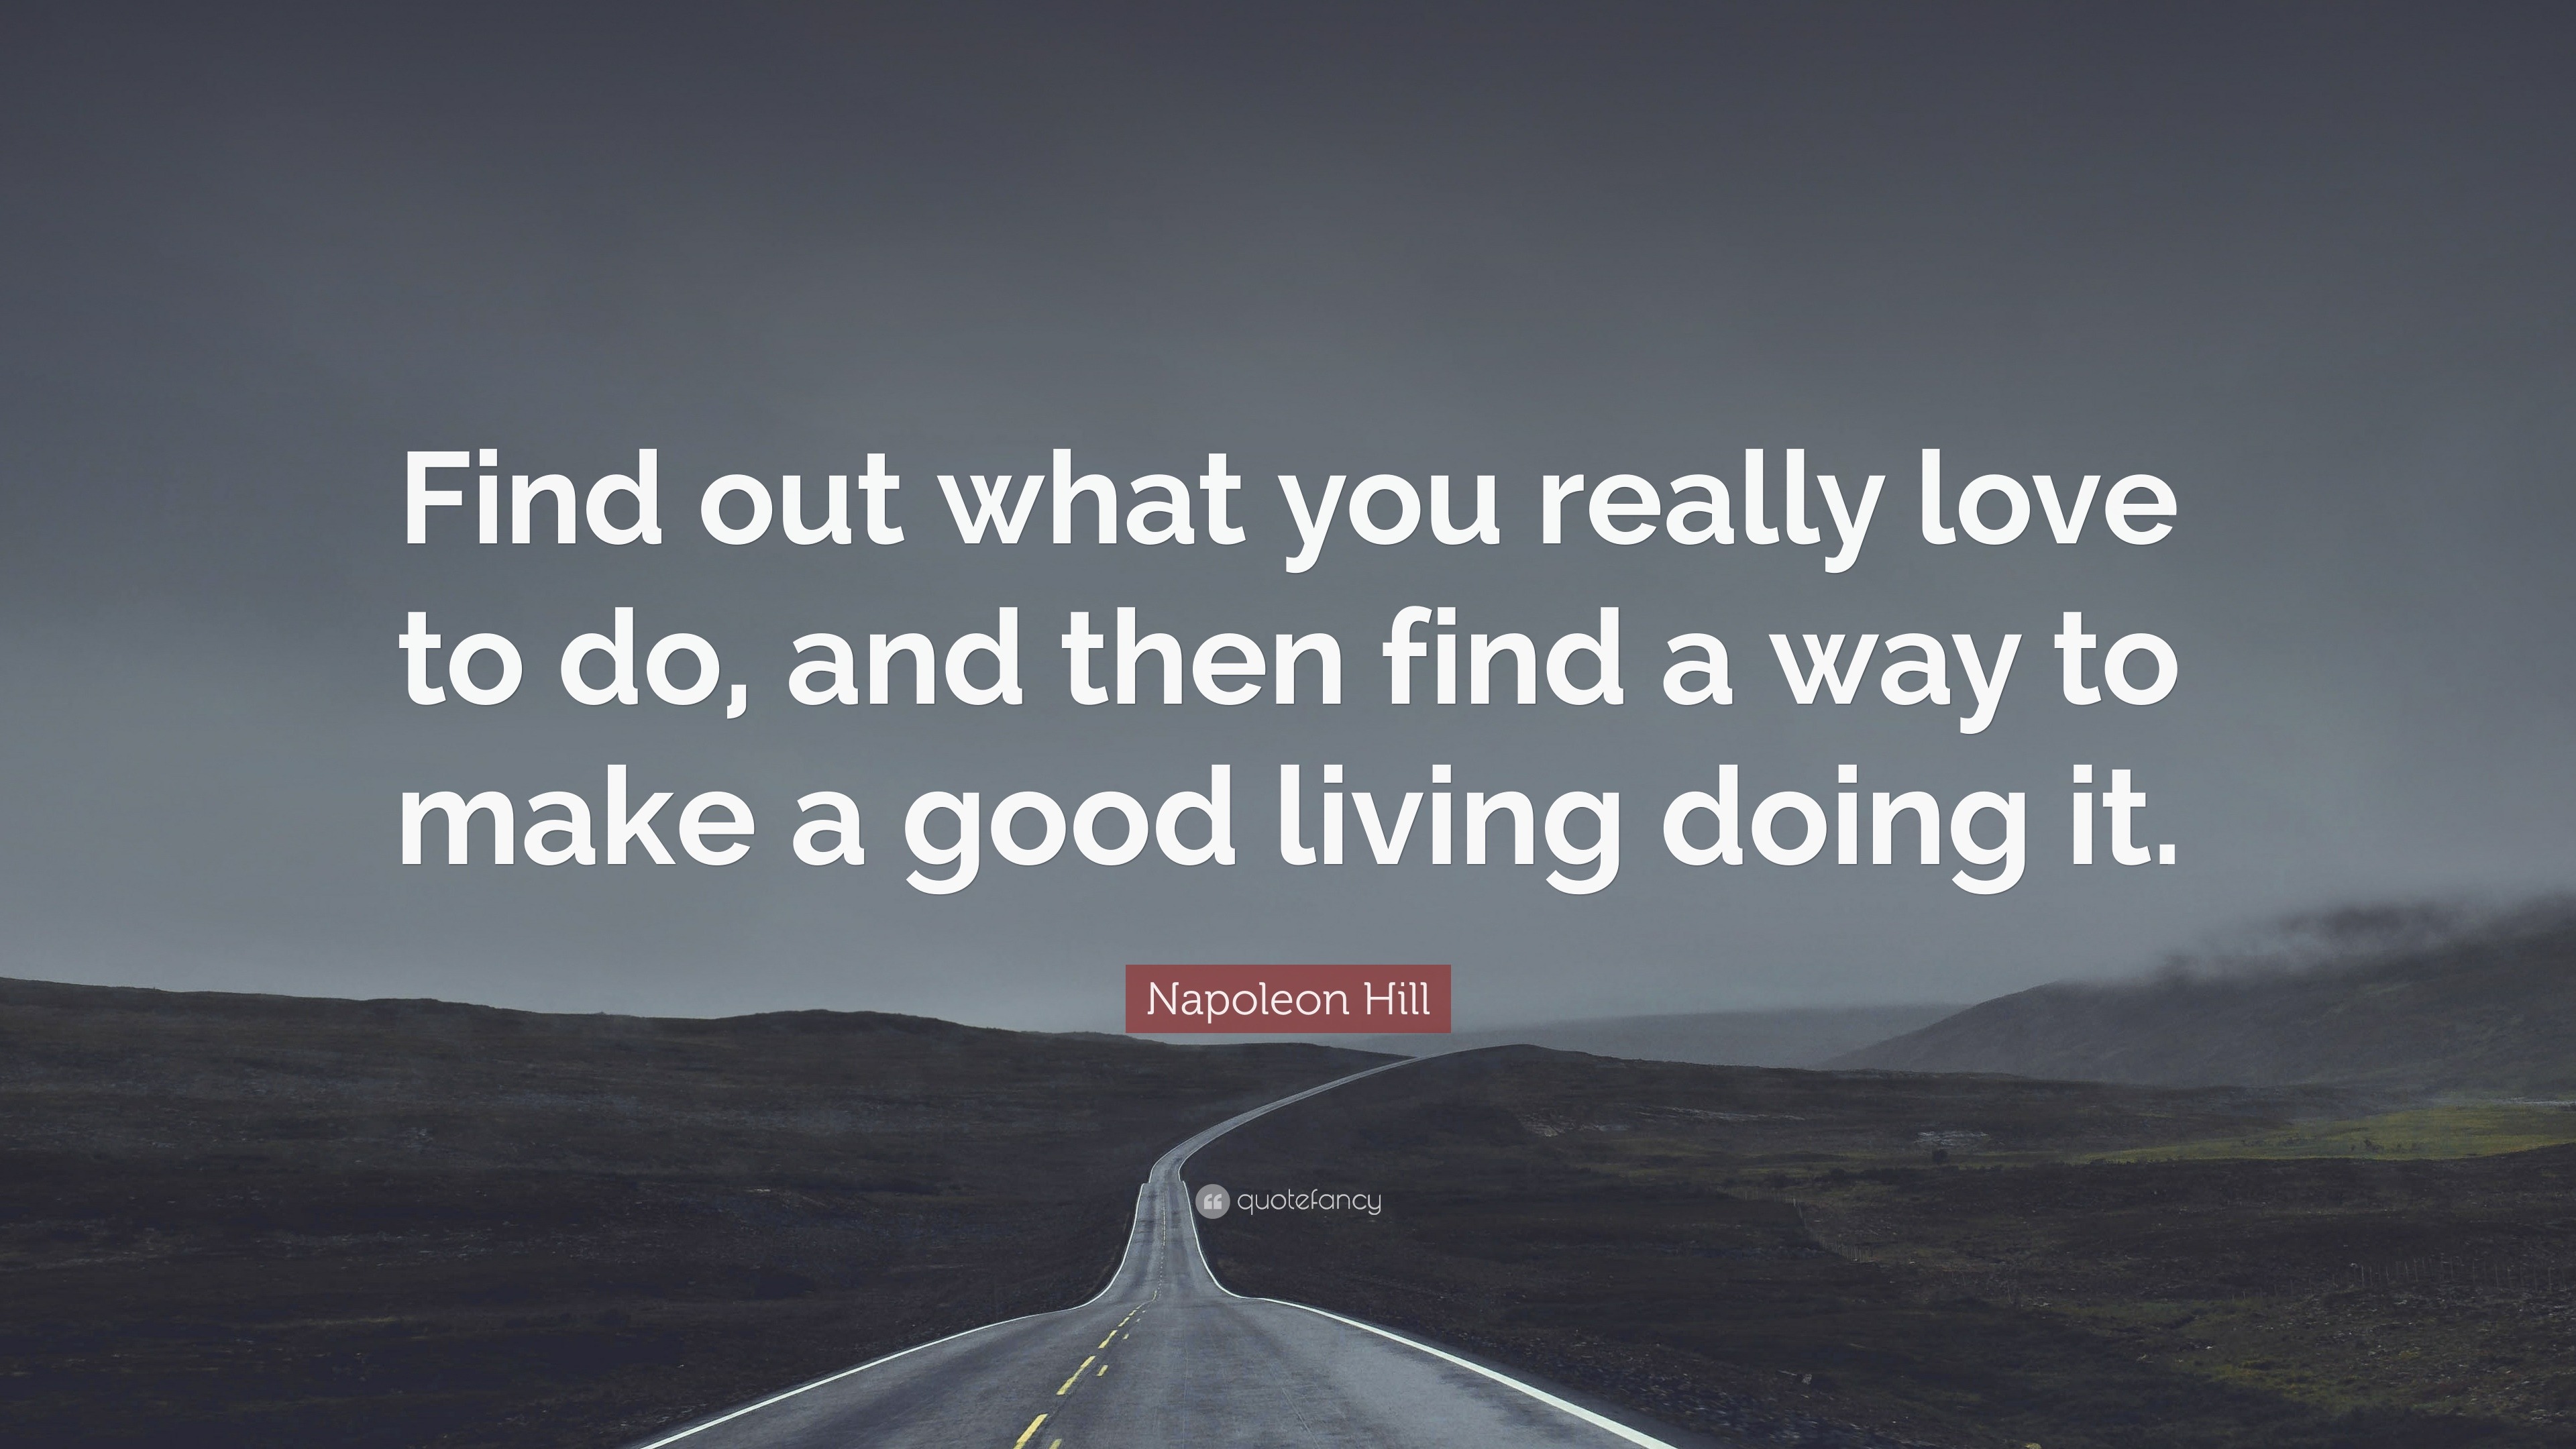 Napoleon Hill Quote “Find out what you really love to do and then